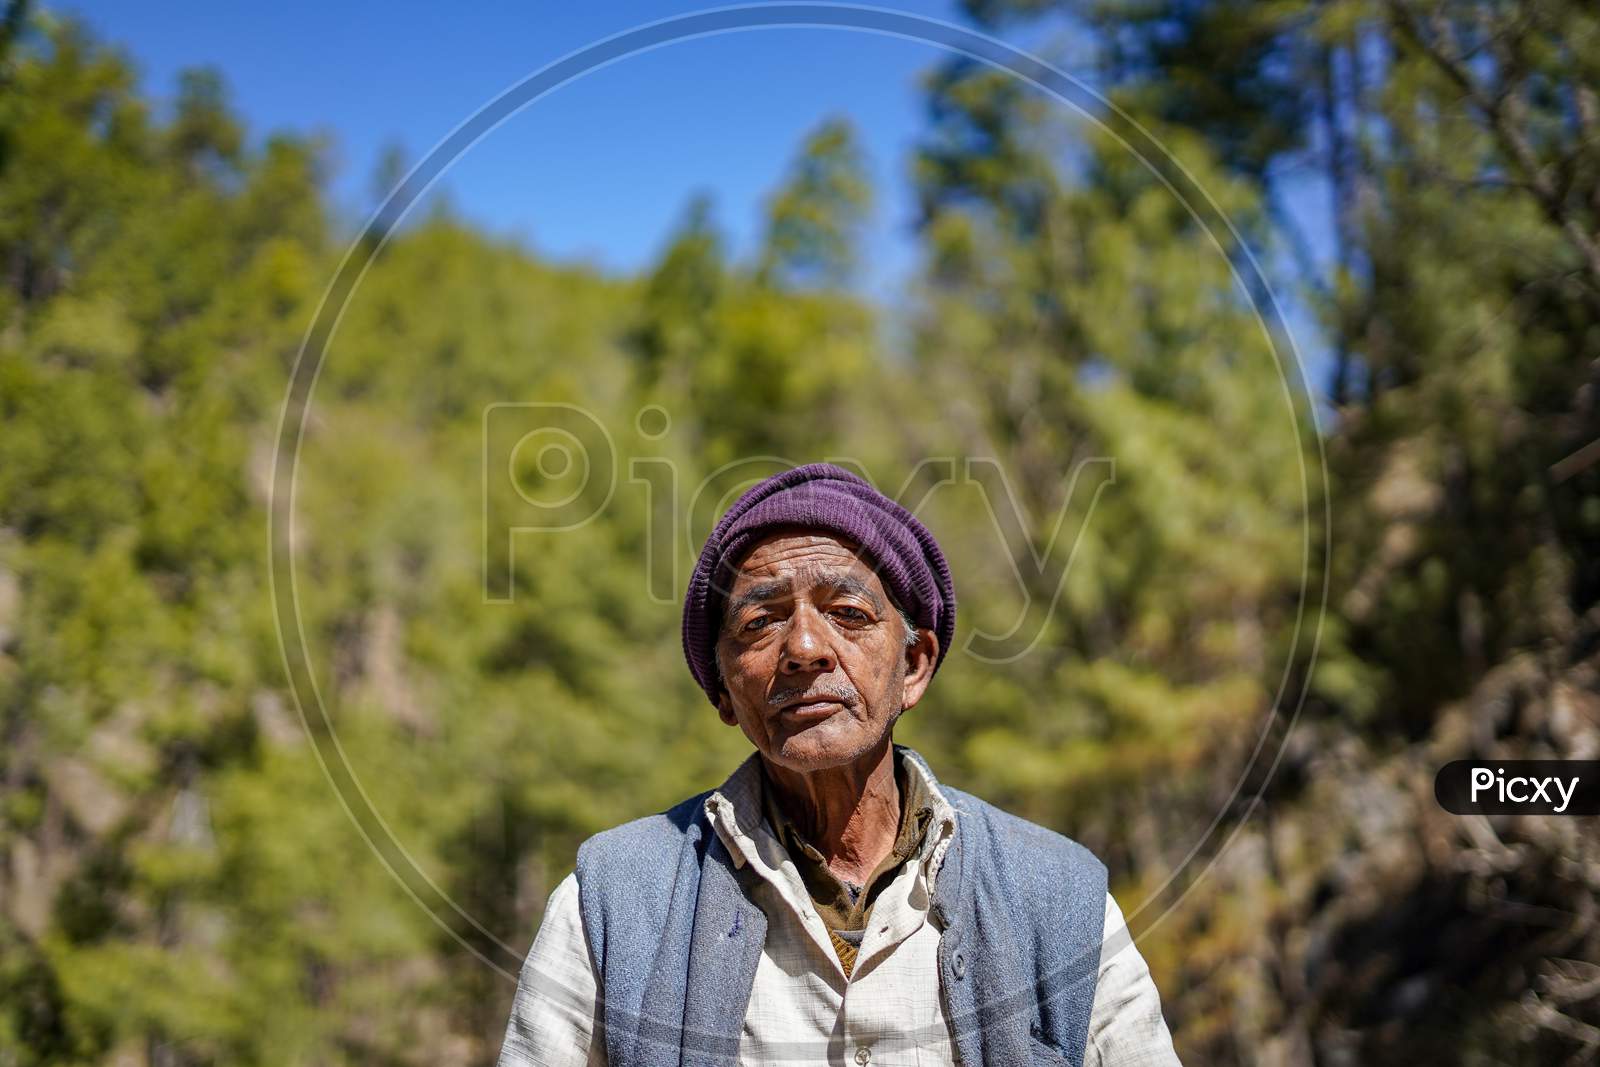 Almora, Uttrakhand / India- June 4 2020: A Wide Portrait Of An Old Man With Wrinkles On His Face Sitting In A Forest Wearing A Cap And A Waistcoat.